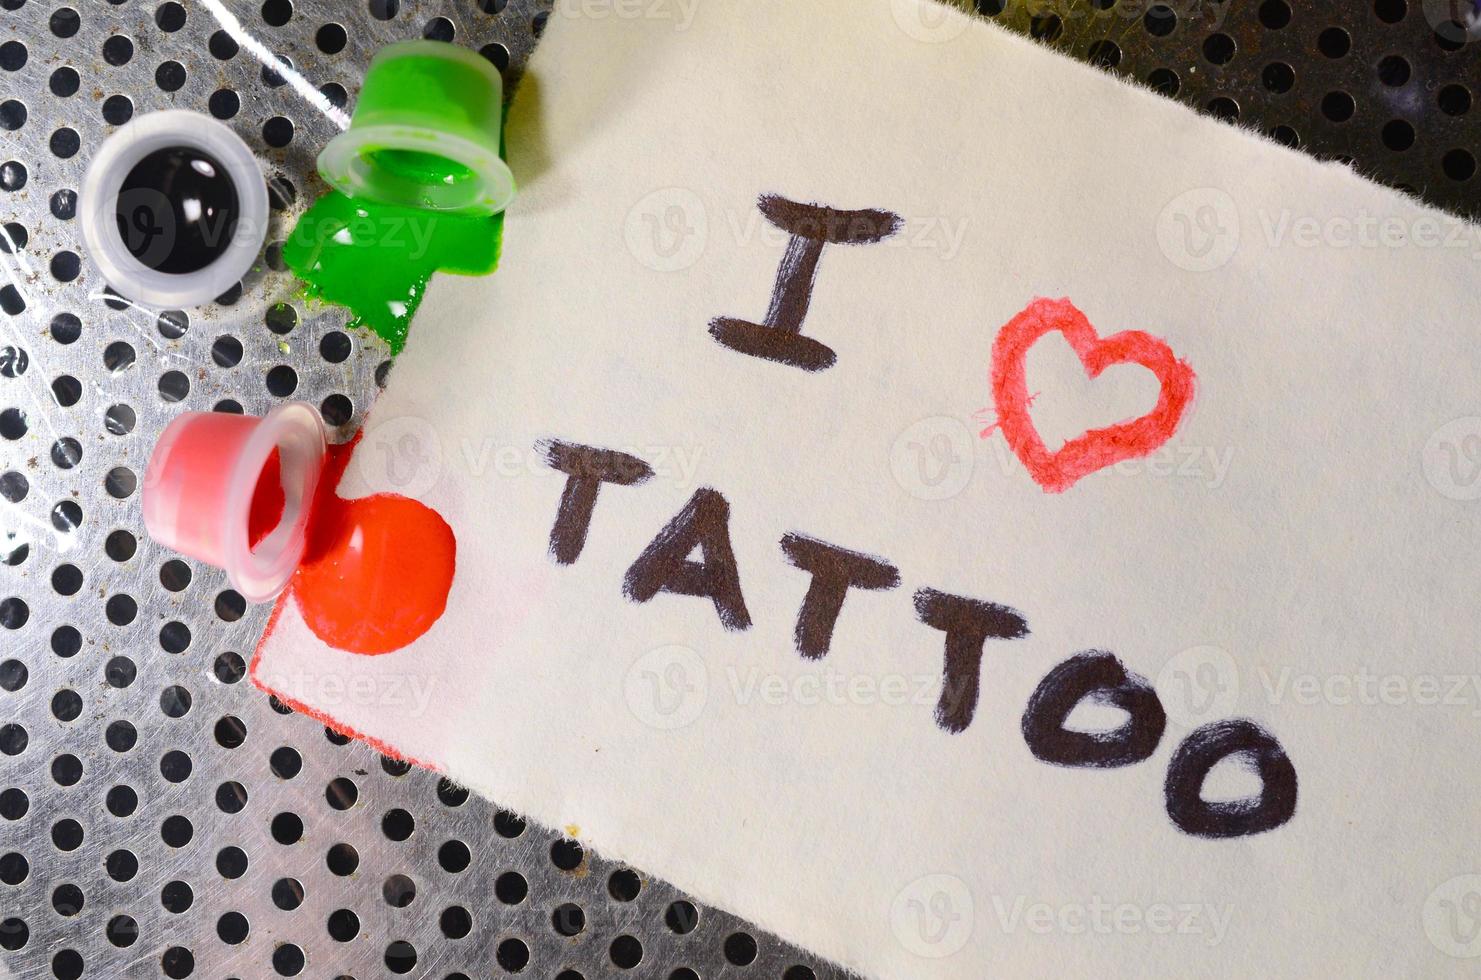 I love tattoo. The text is written on a small sheet of paper next to the overturned caps with colored tattoo ink photo